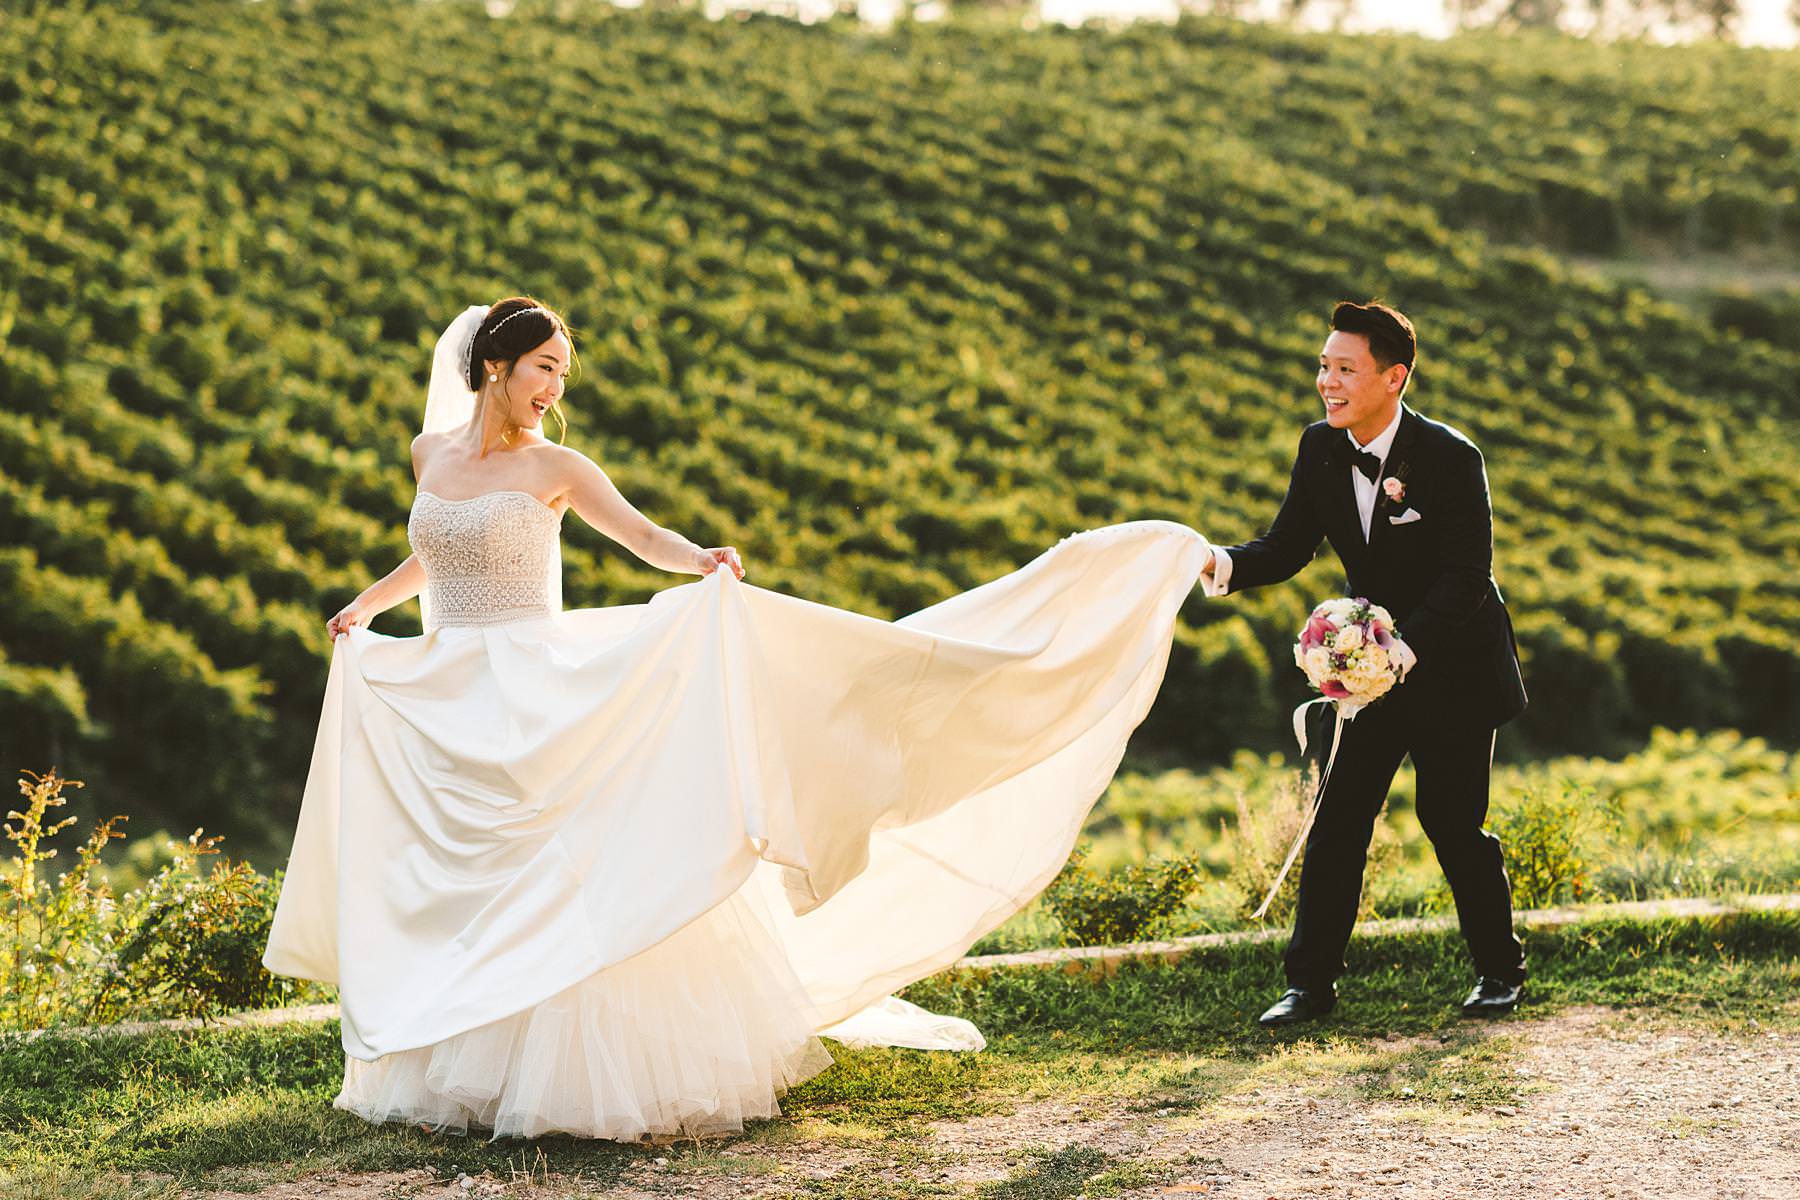 Wedding photo in around the vineyard surrounding Castello Il Palagio a typical scenery of Chianti in Tuscany. Bride in Maggie Sottero elegant gown and groom in Indochino suit